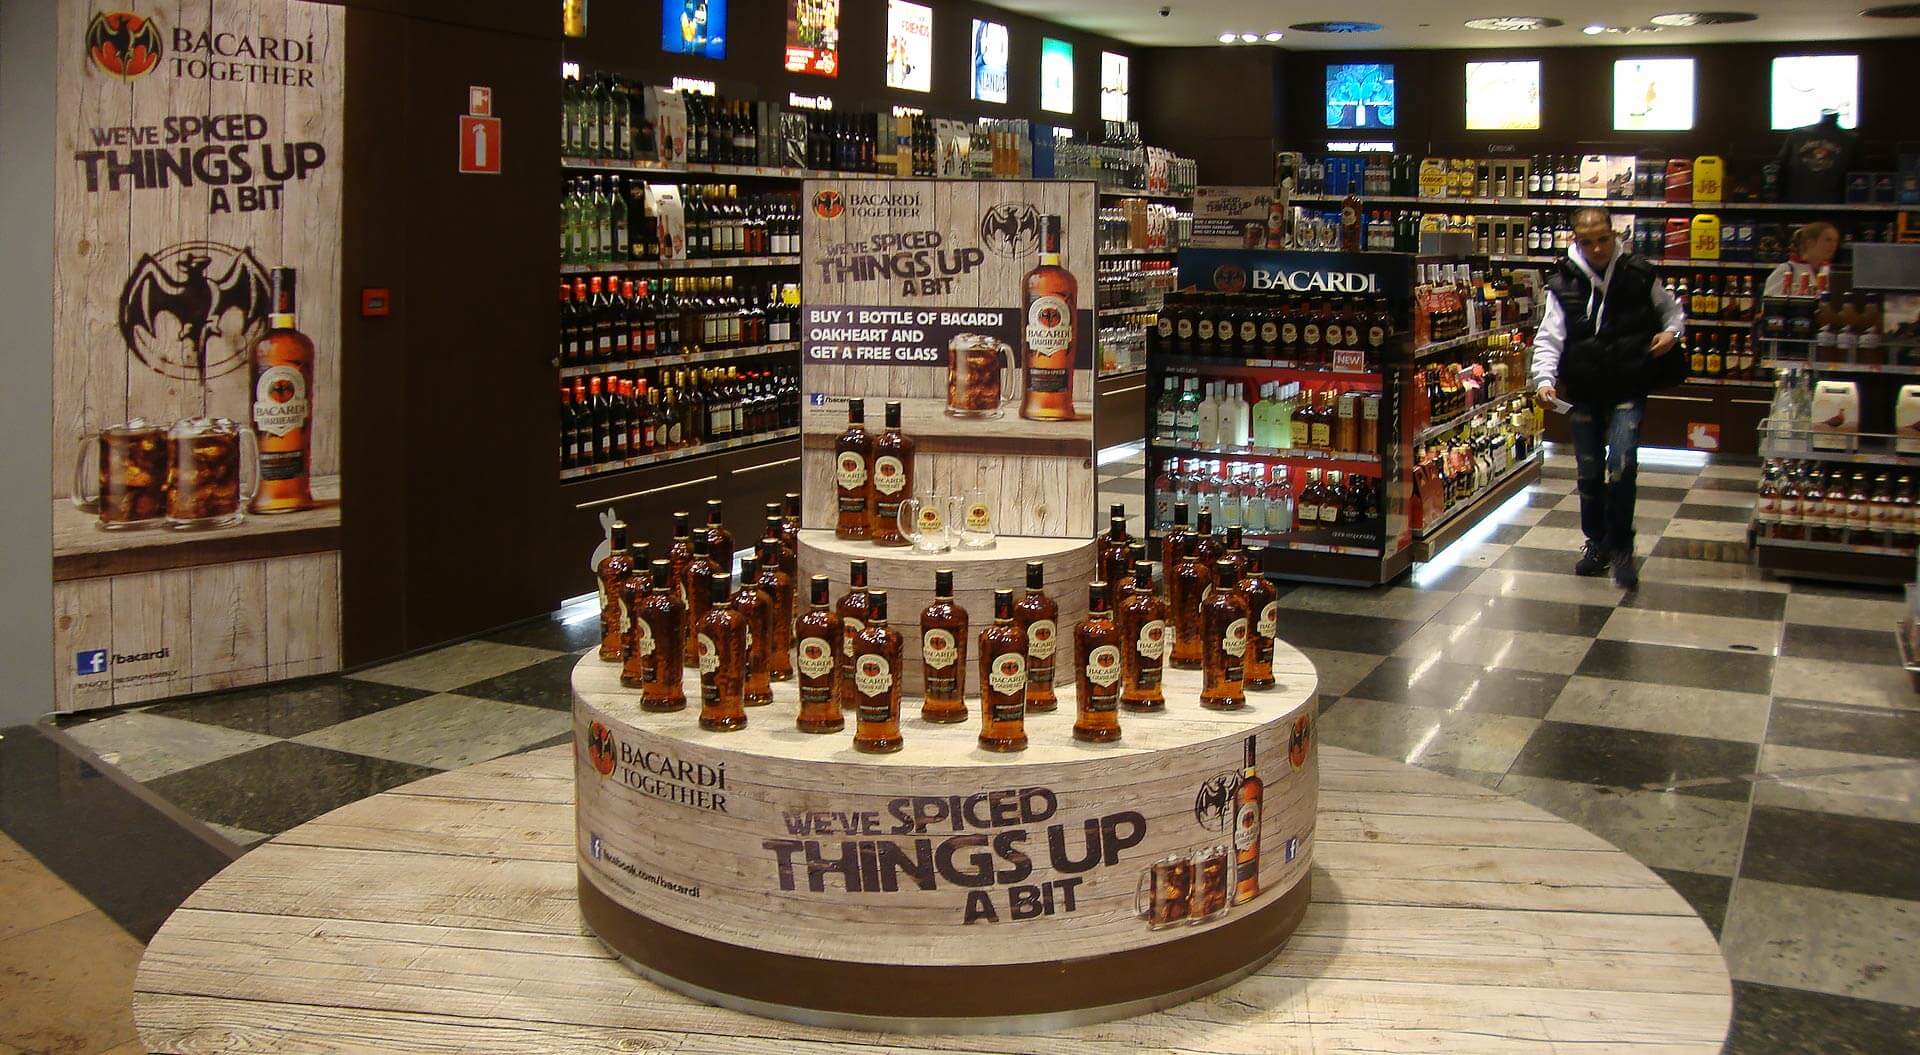 Bacardi Global Travel Retail, Oakheart brand experience, in airport duty free stores, we've spiced things up a bit brand identity and platform